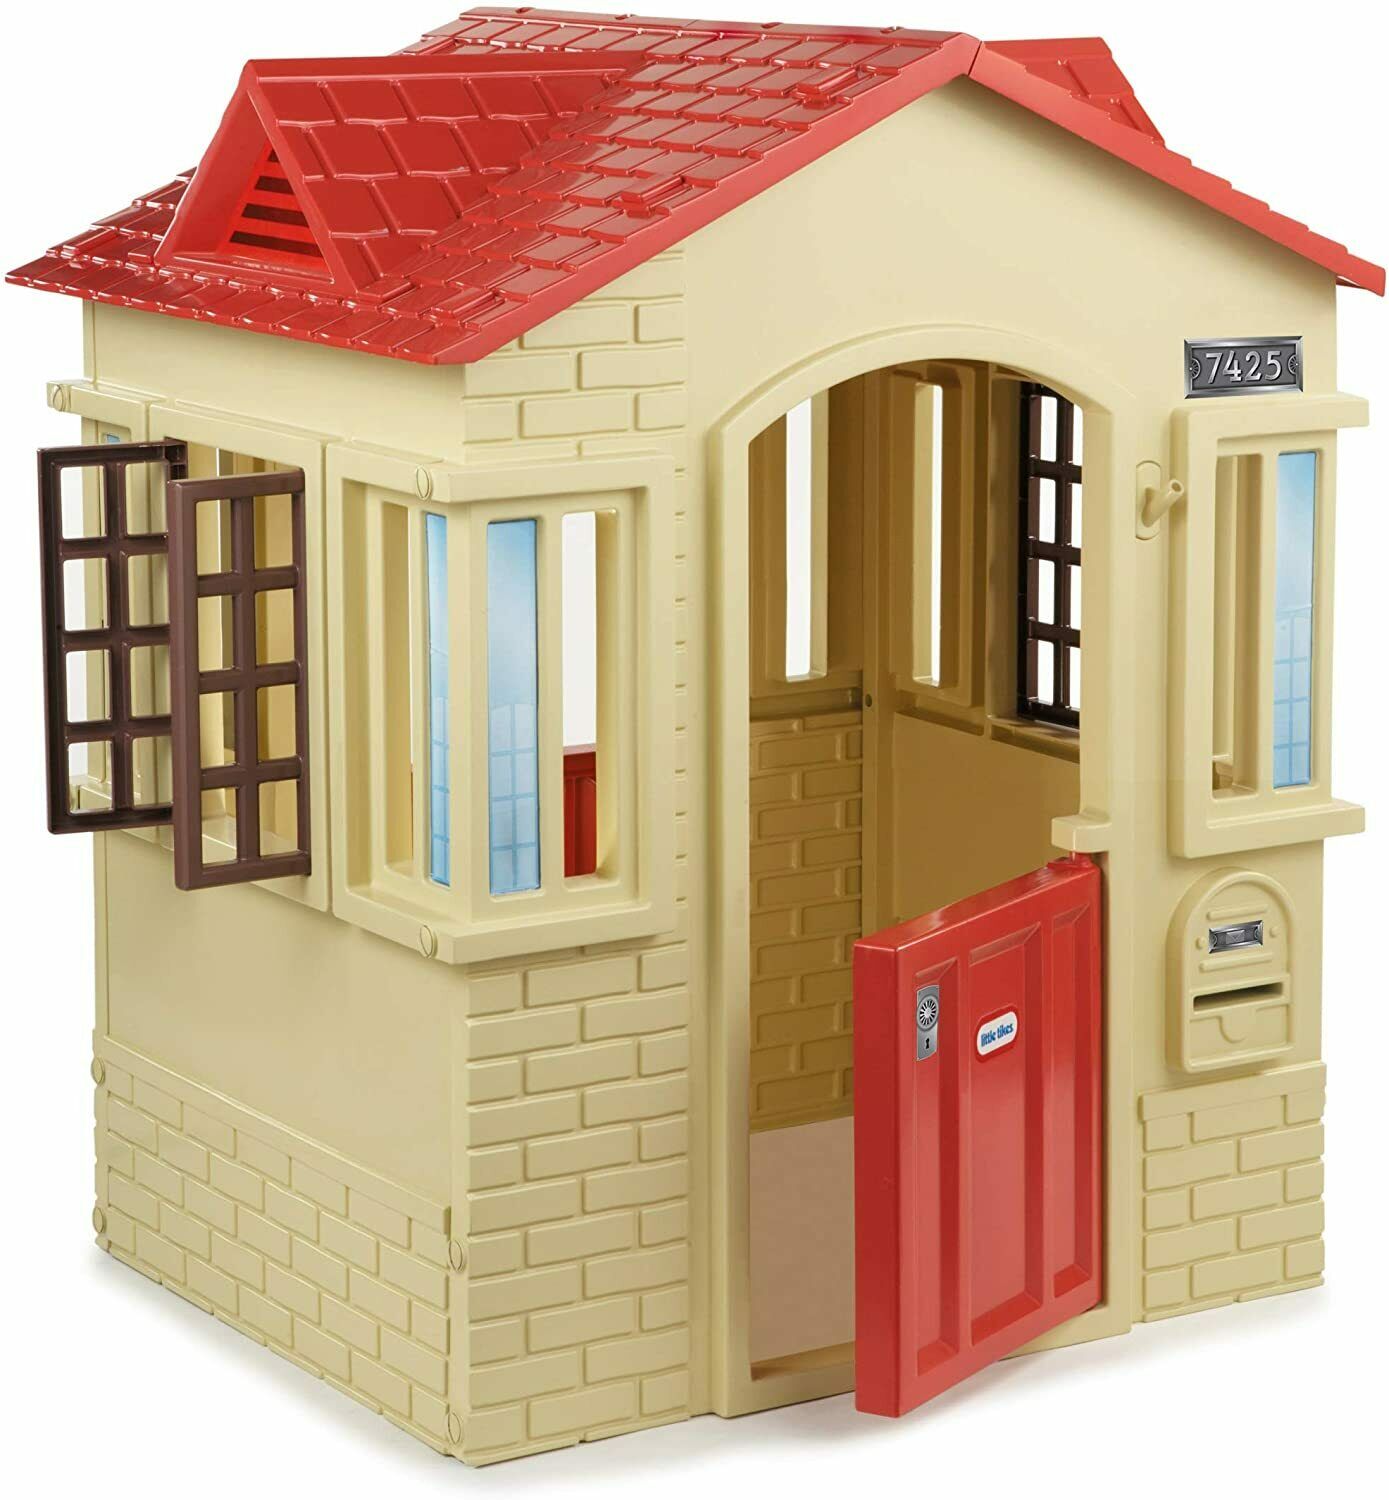 Children's Cape Cottage Playhouse w/Working Doors Windows and Shutters Outdoor